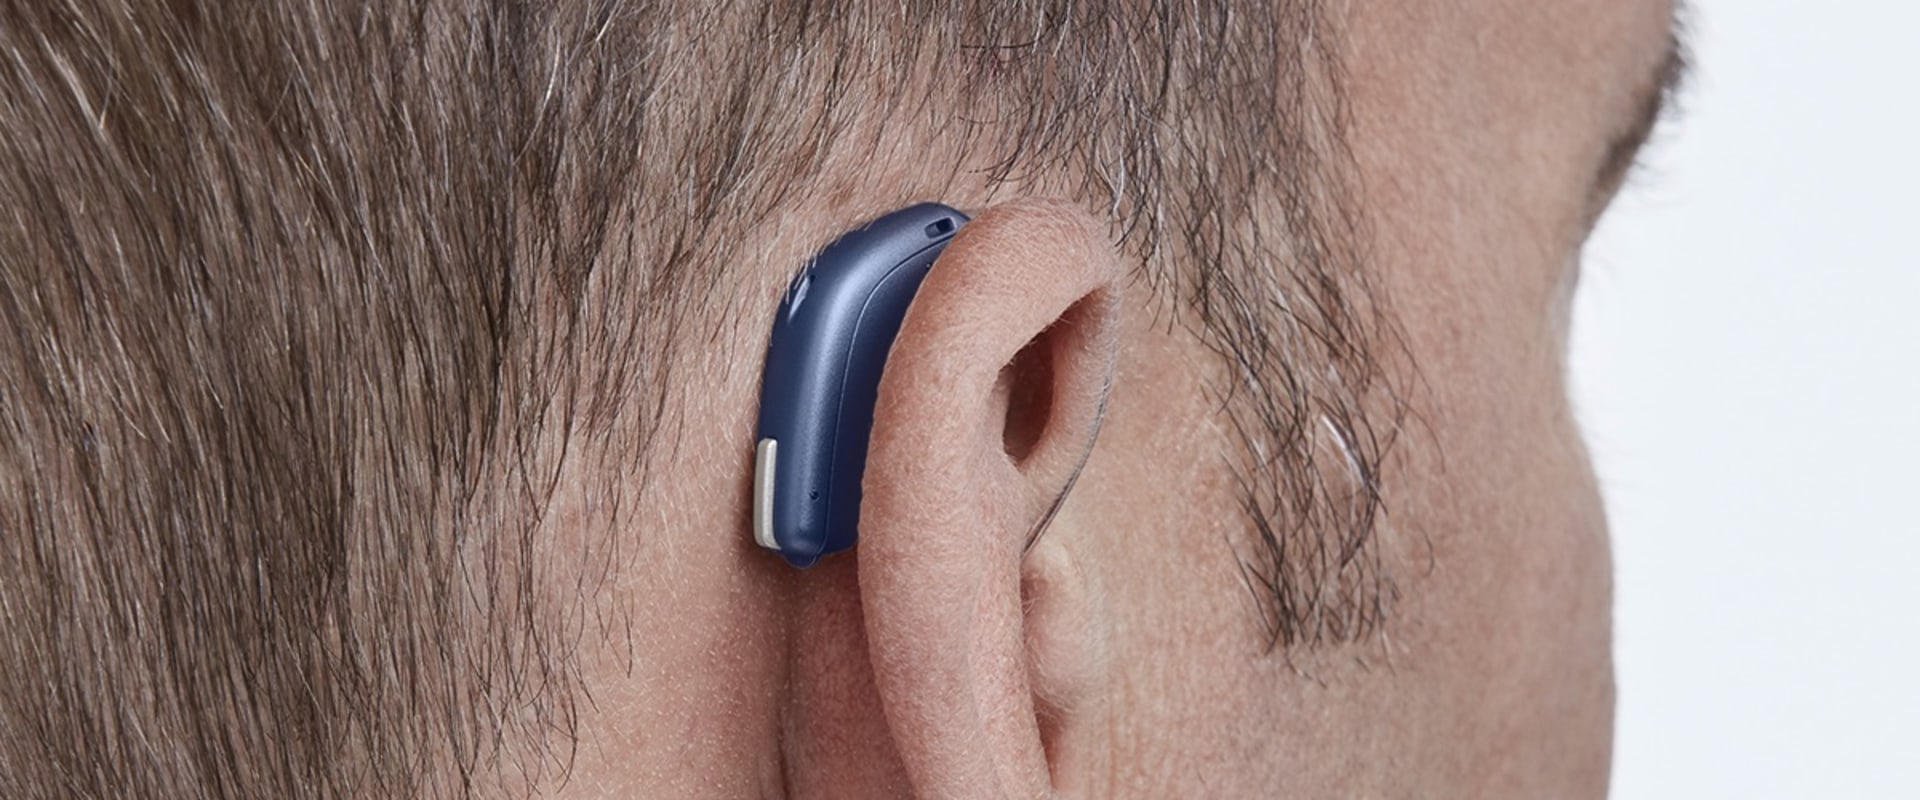 What is the name of costco hearing aids?